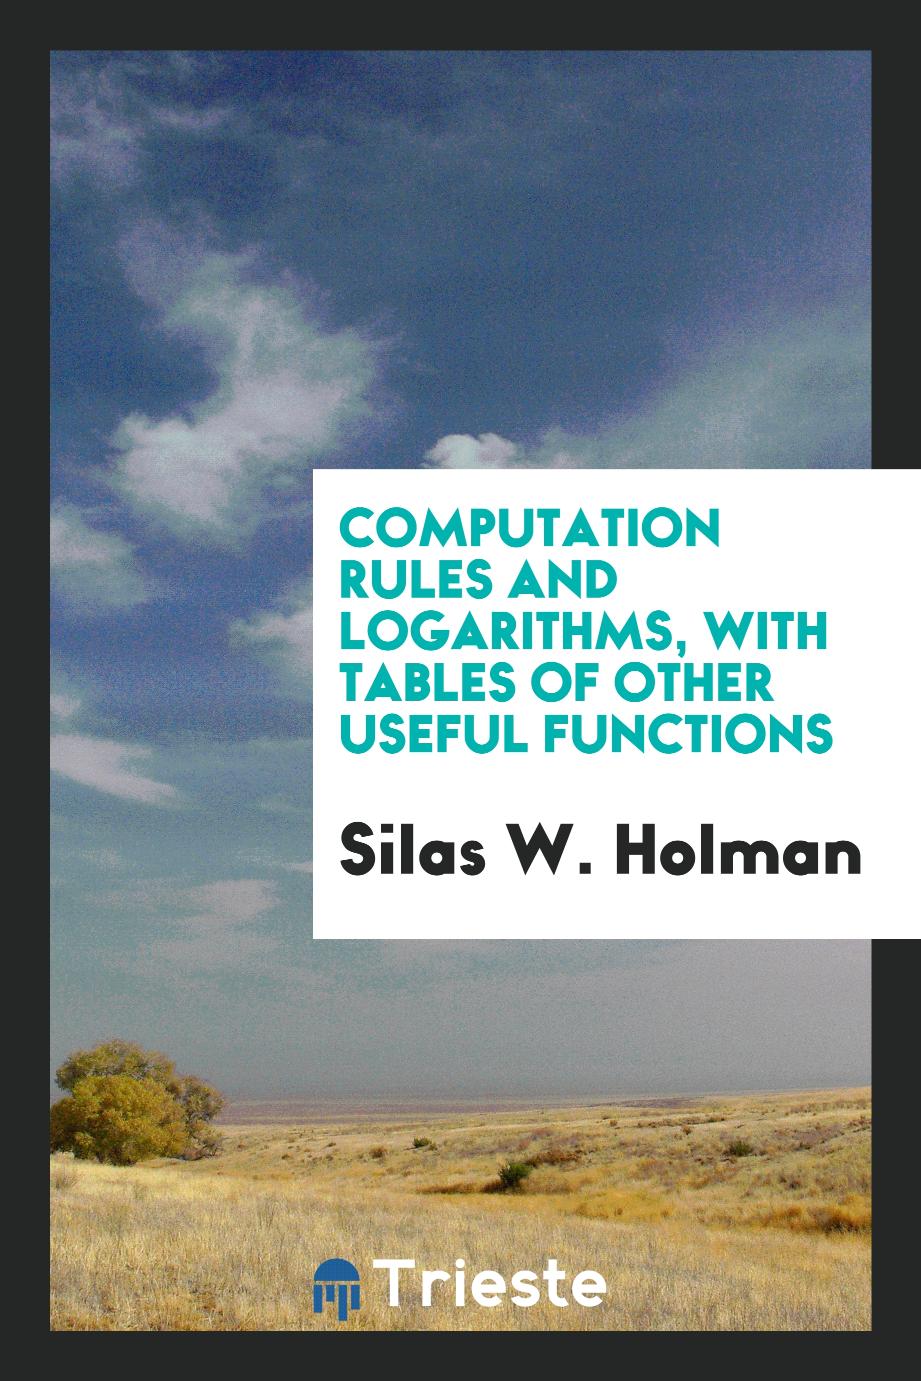 Computation Rules and Logarithms, with Tables of Other Useful Functions